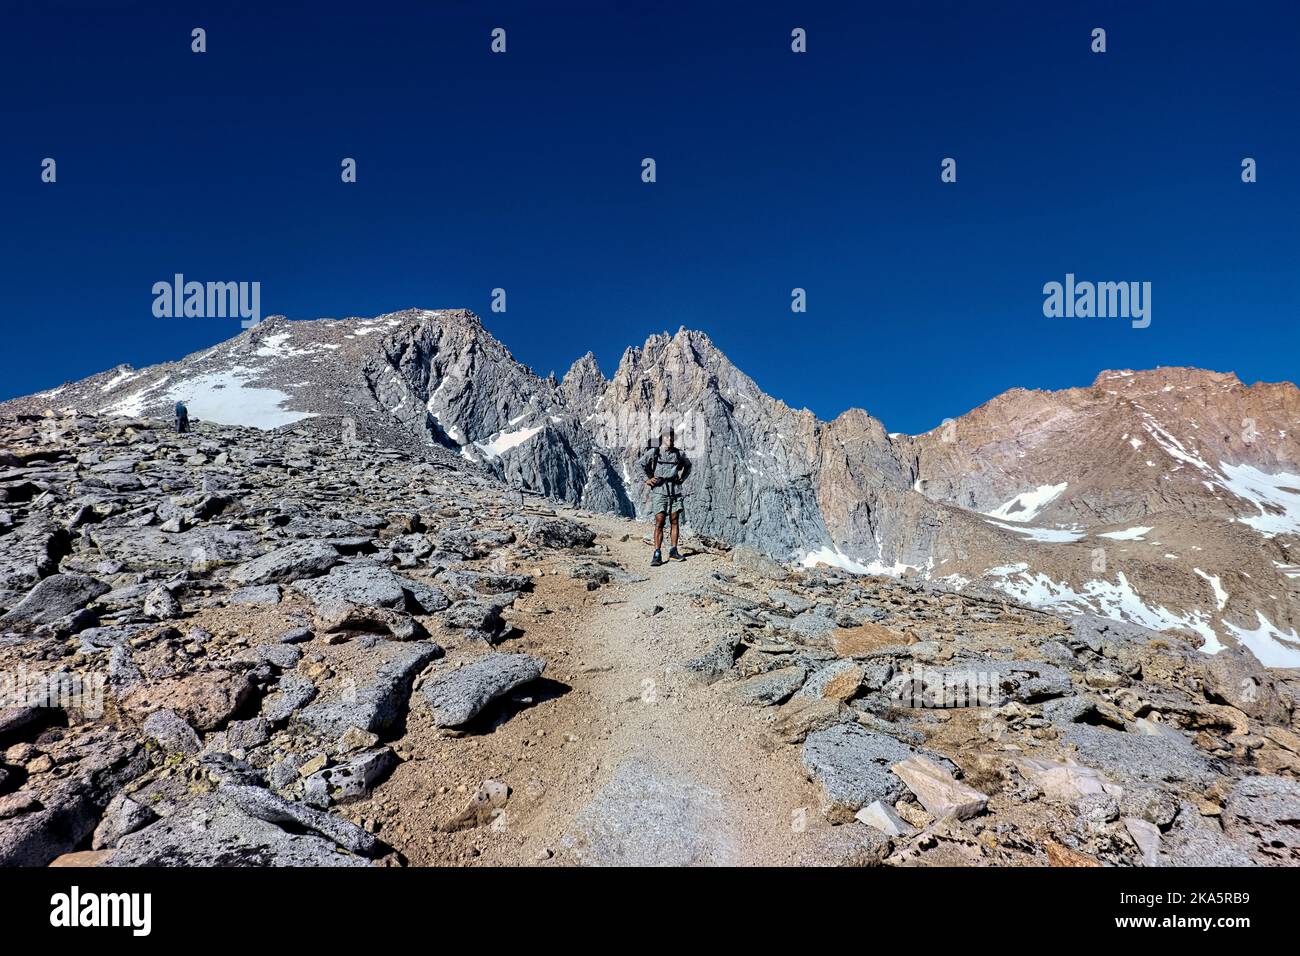 Hiking between Forester and Glen Pass, Kings Canyon National Park, Pacific Crest Trail, California, USA Stock Photo